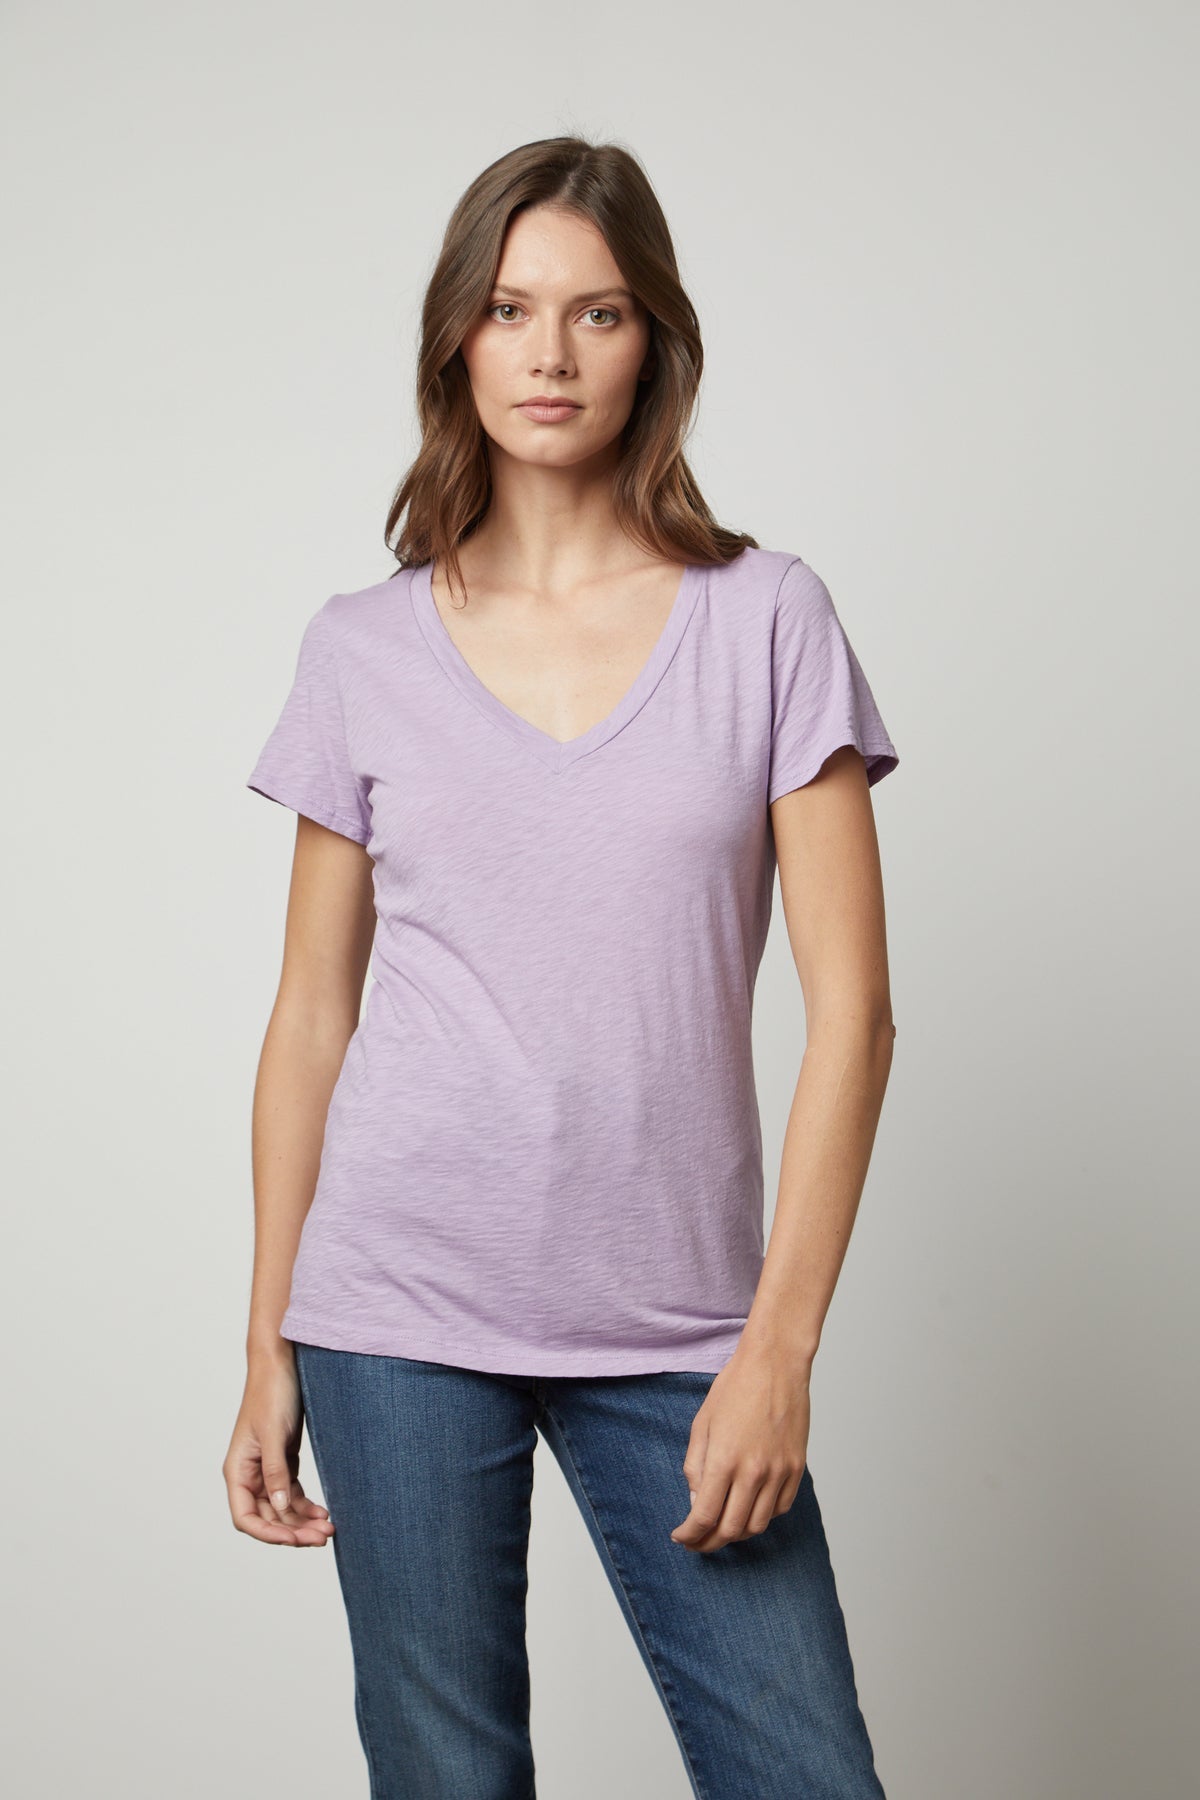   A woman sporting a preppy tomboy style in a lavender LILITH COTTON SLUB V-NECK TEE by Velvet by Graham & Spencer. 